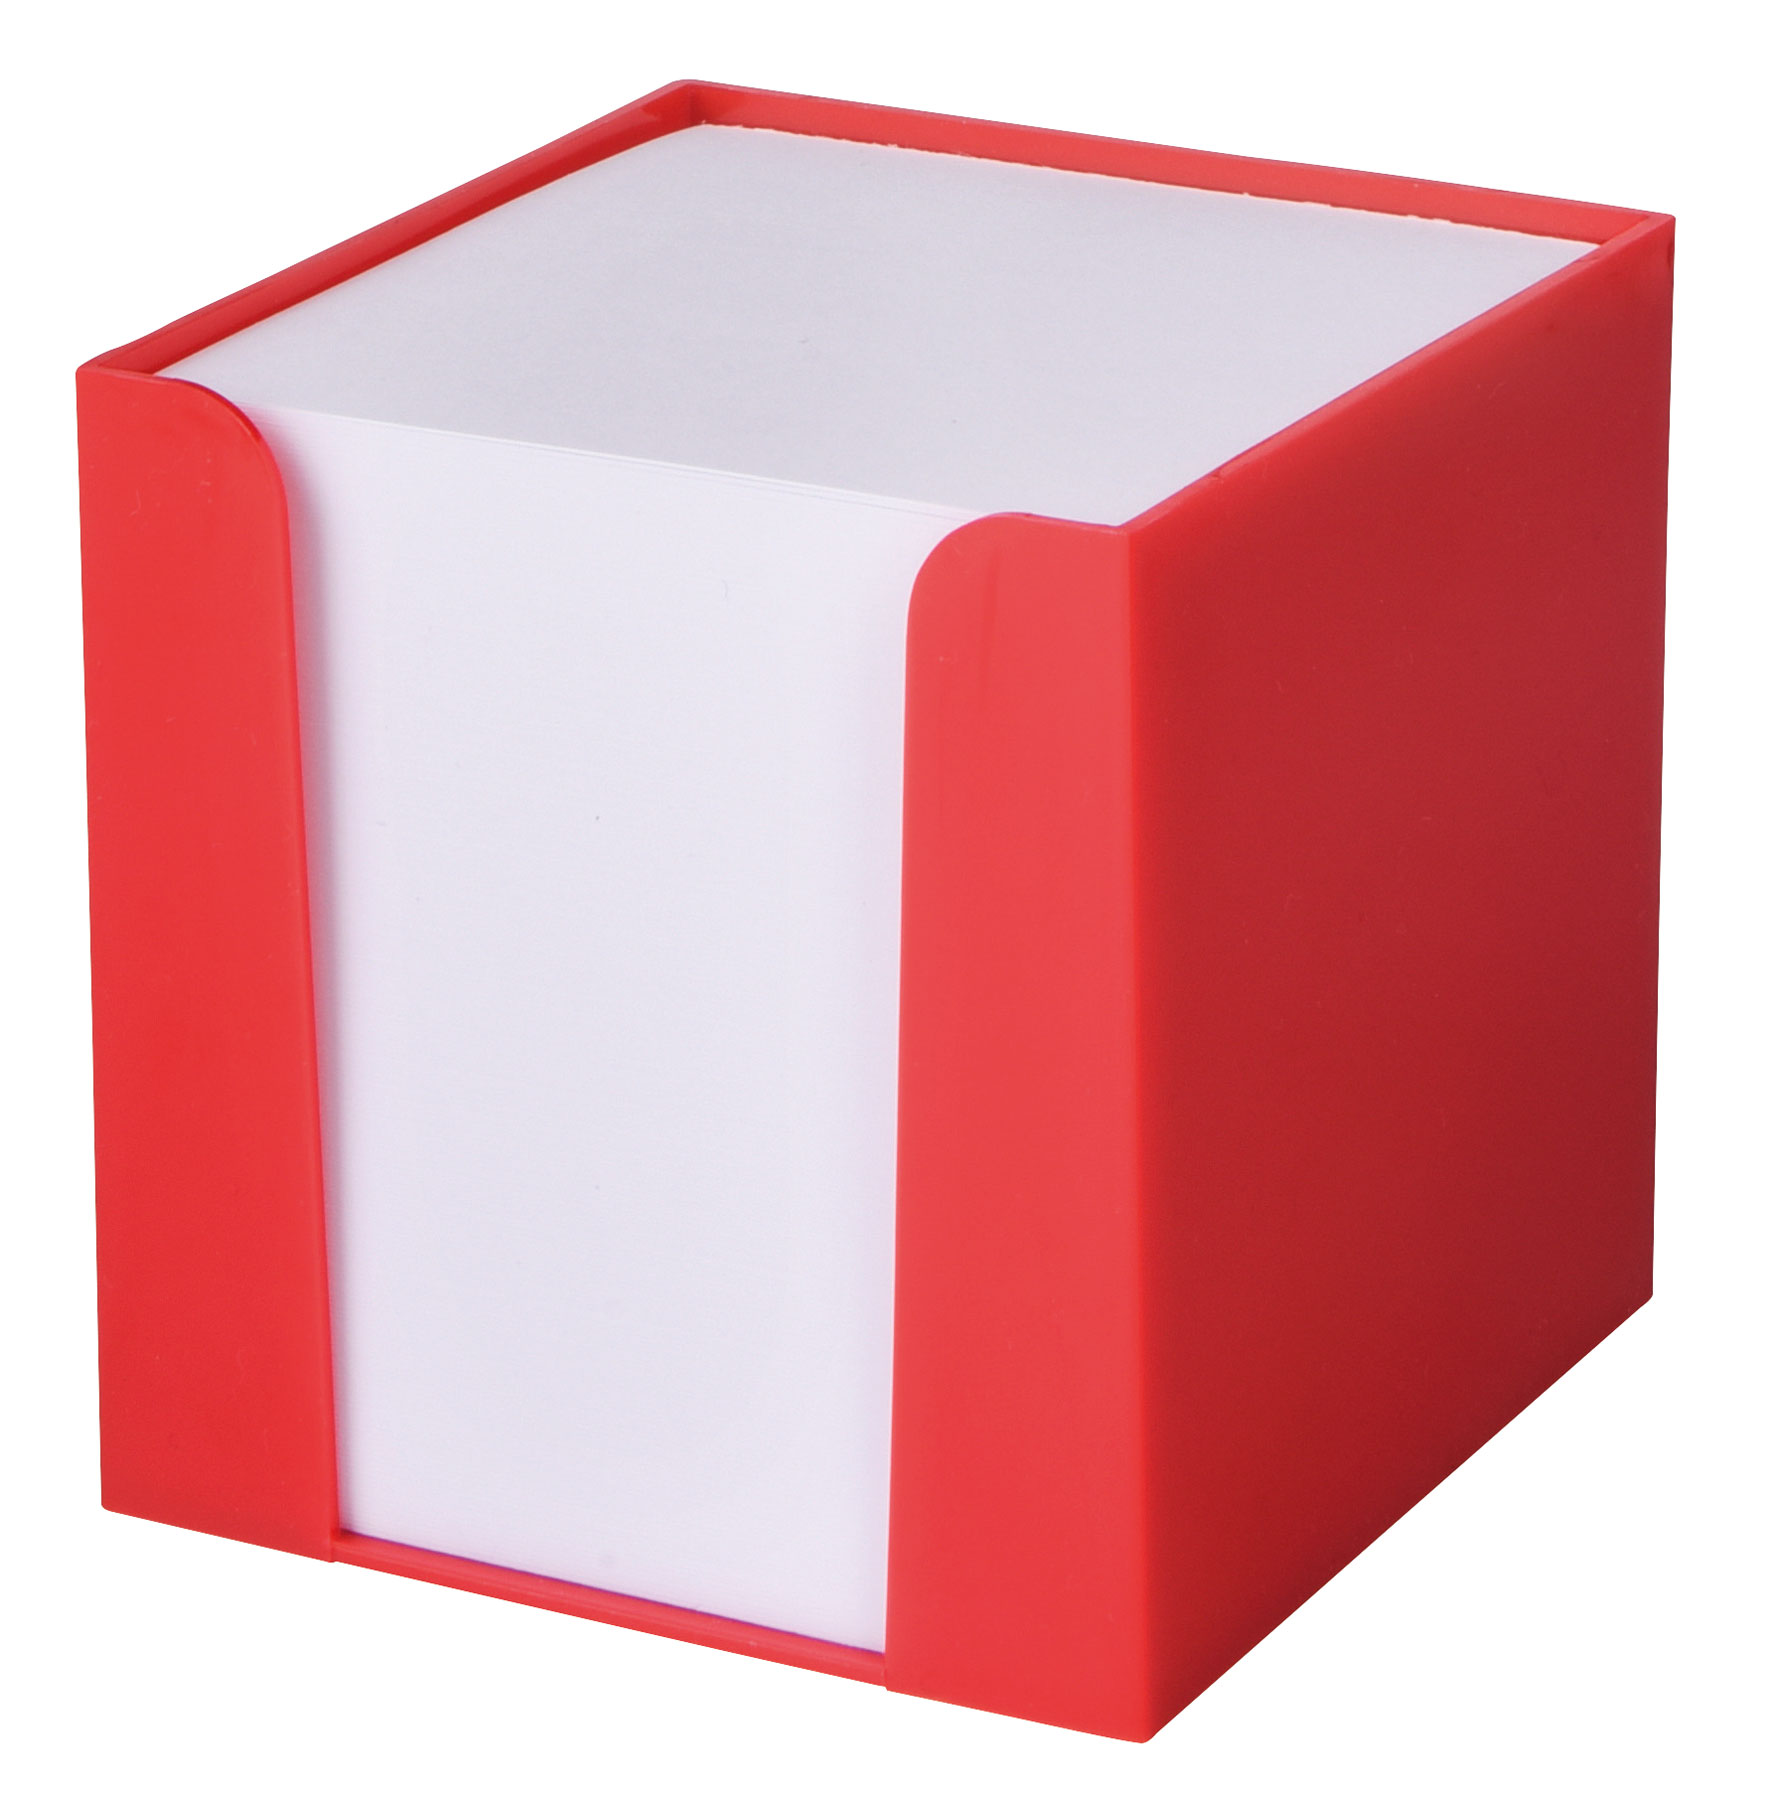 Memo cube NEVER FORGET - red